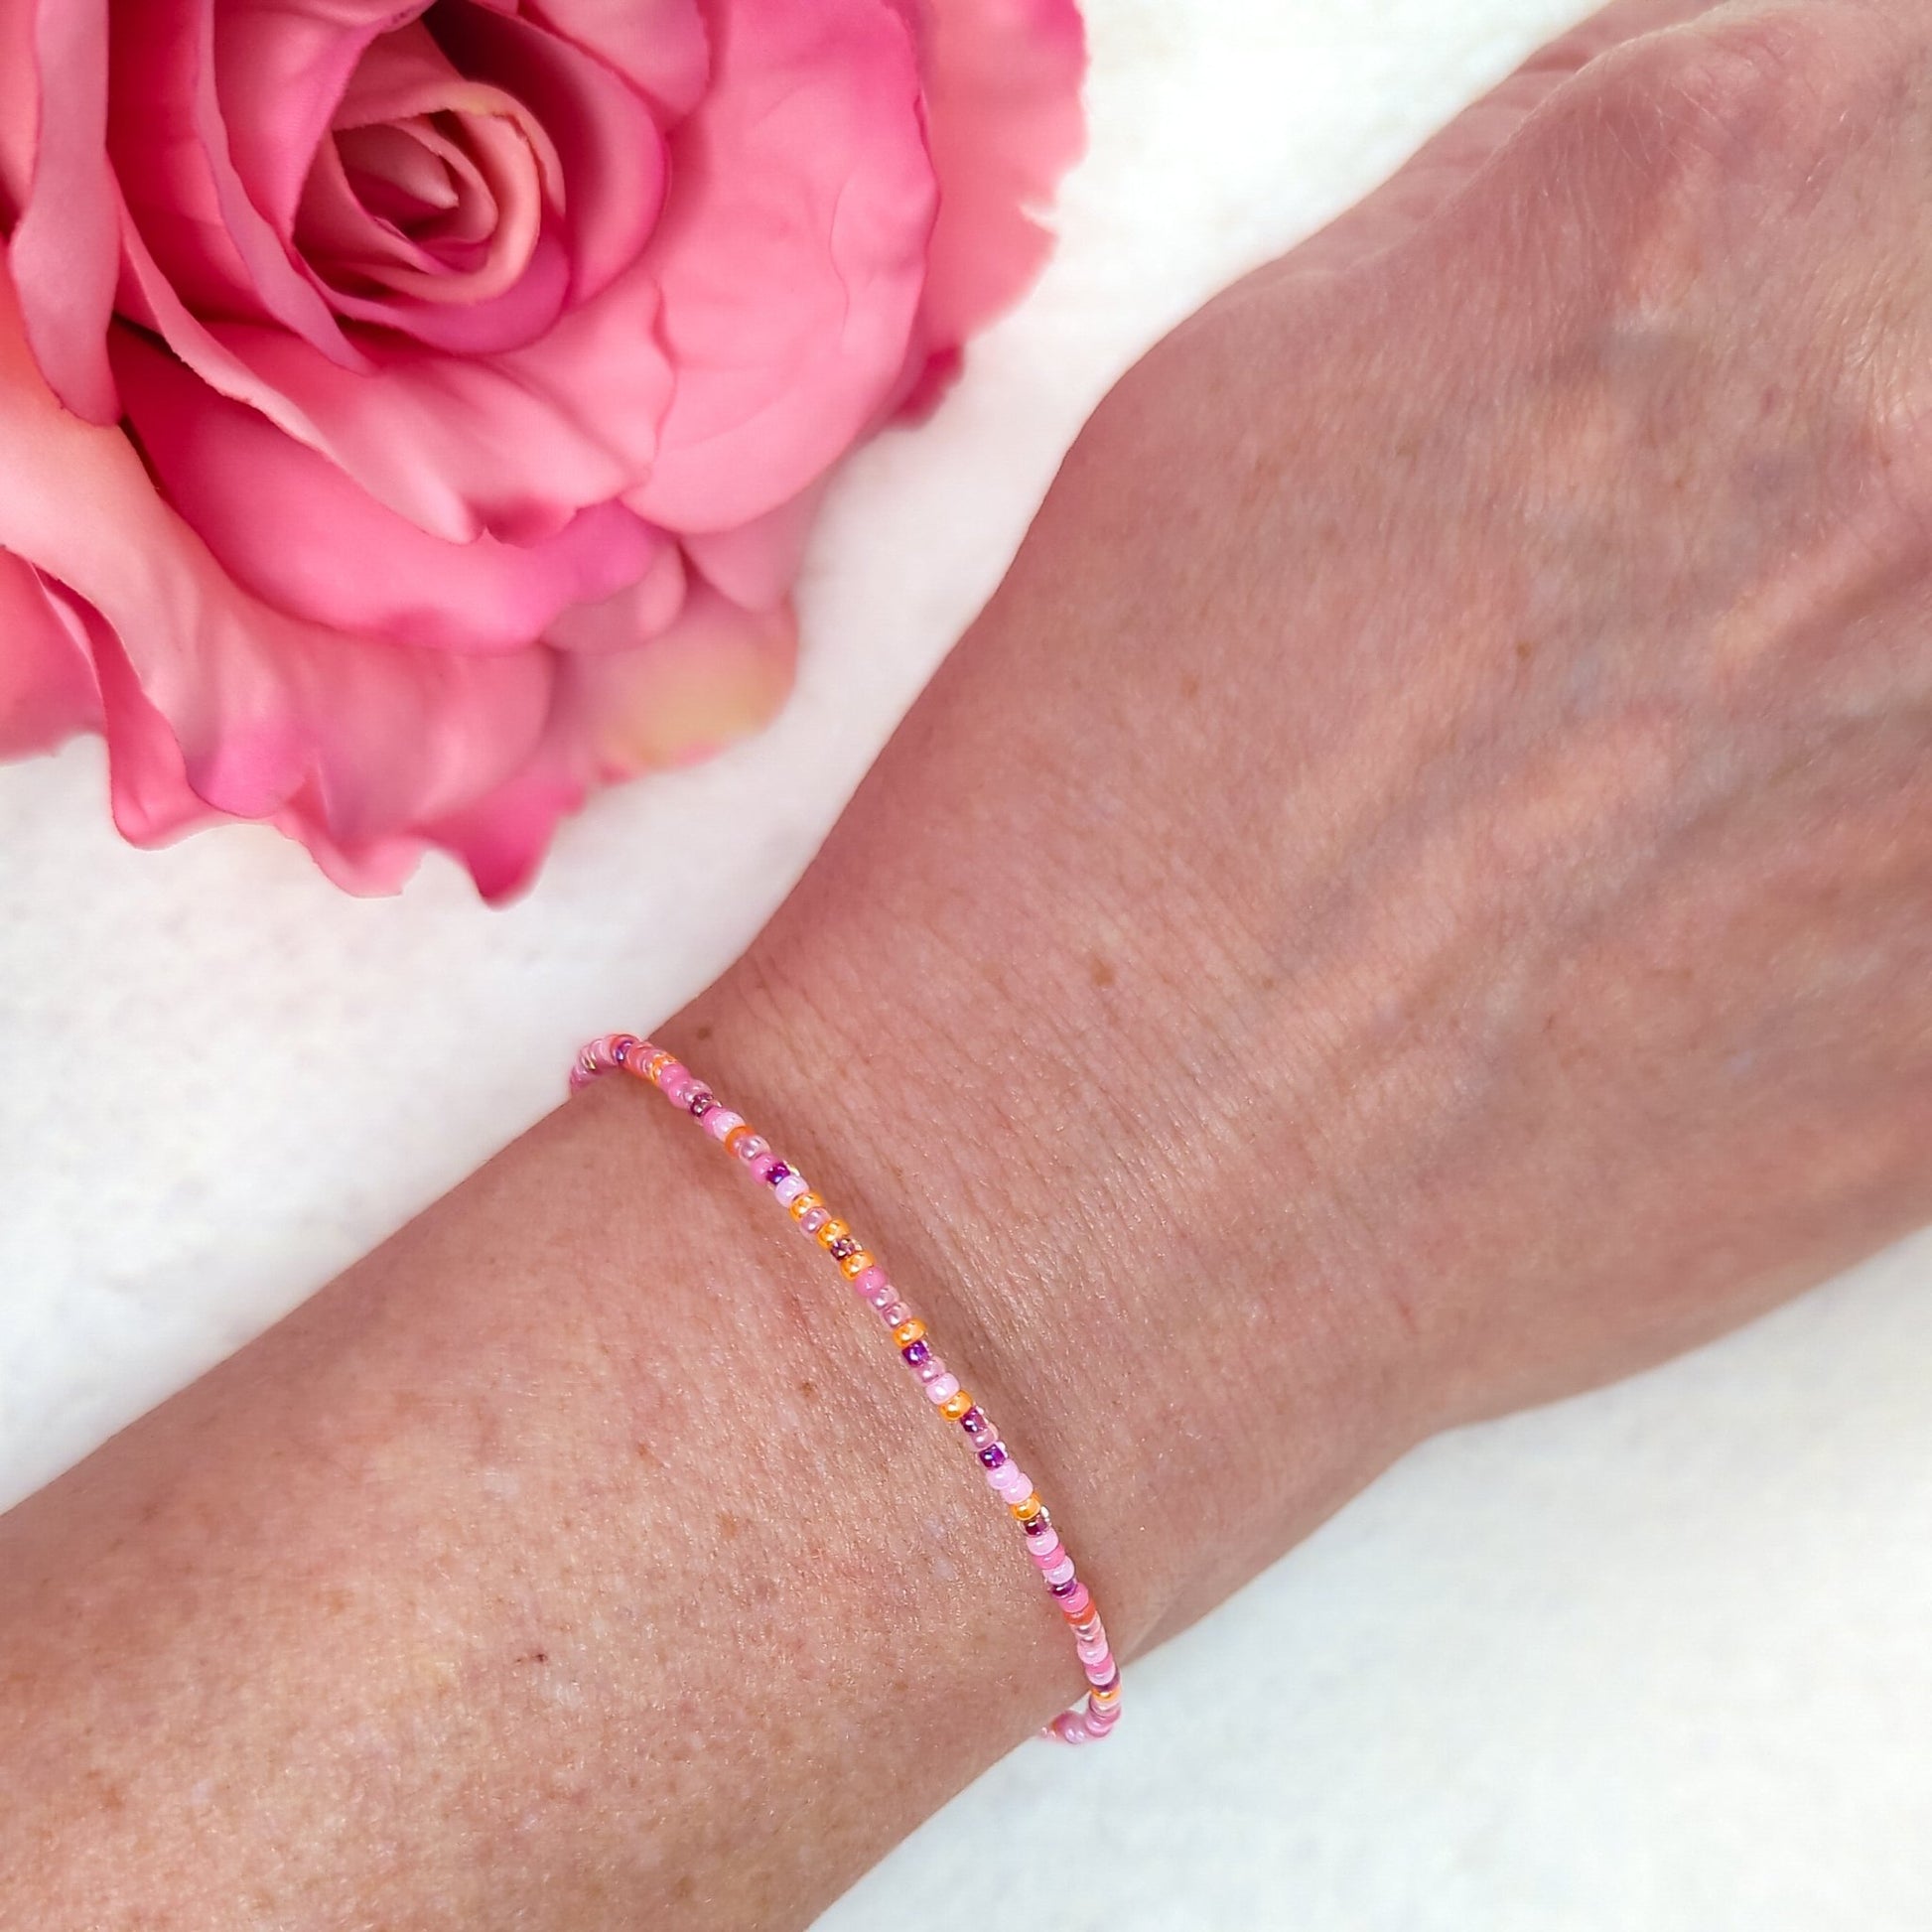 Dainty bracelet - Pink and Orange seed bead bracelet - creations by cherie